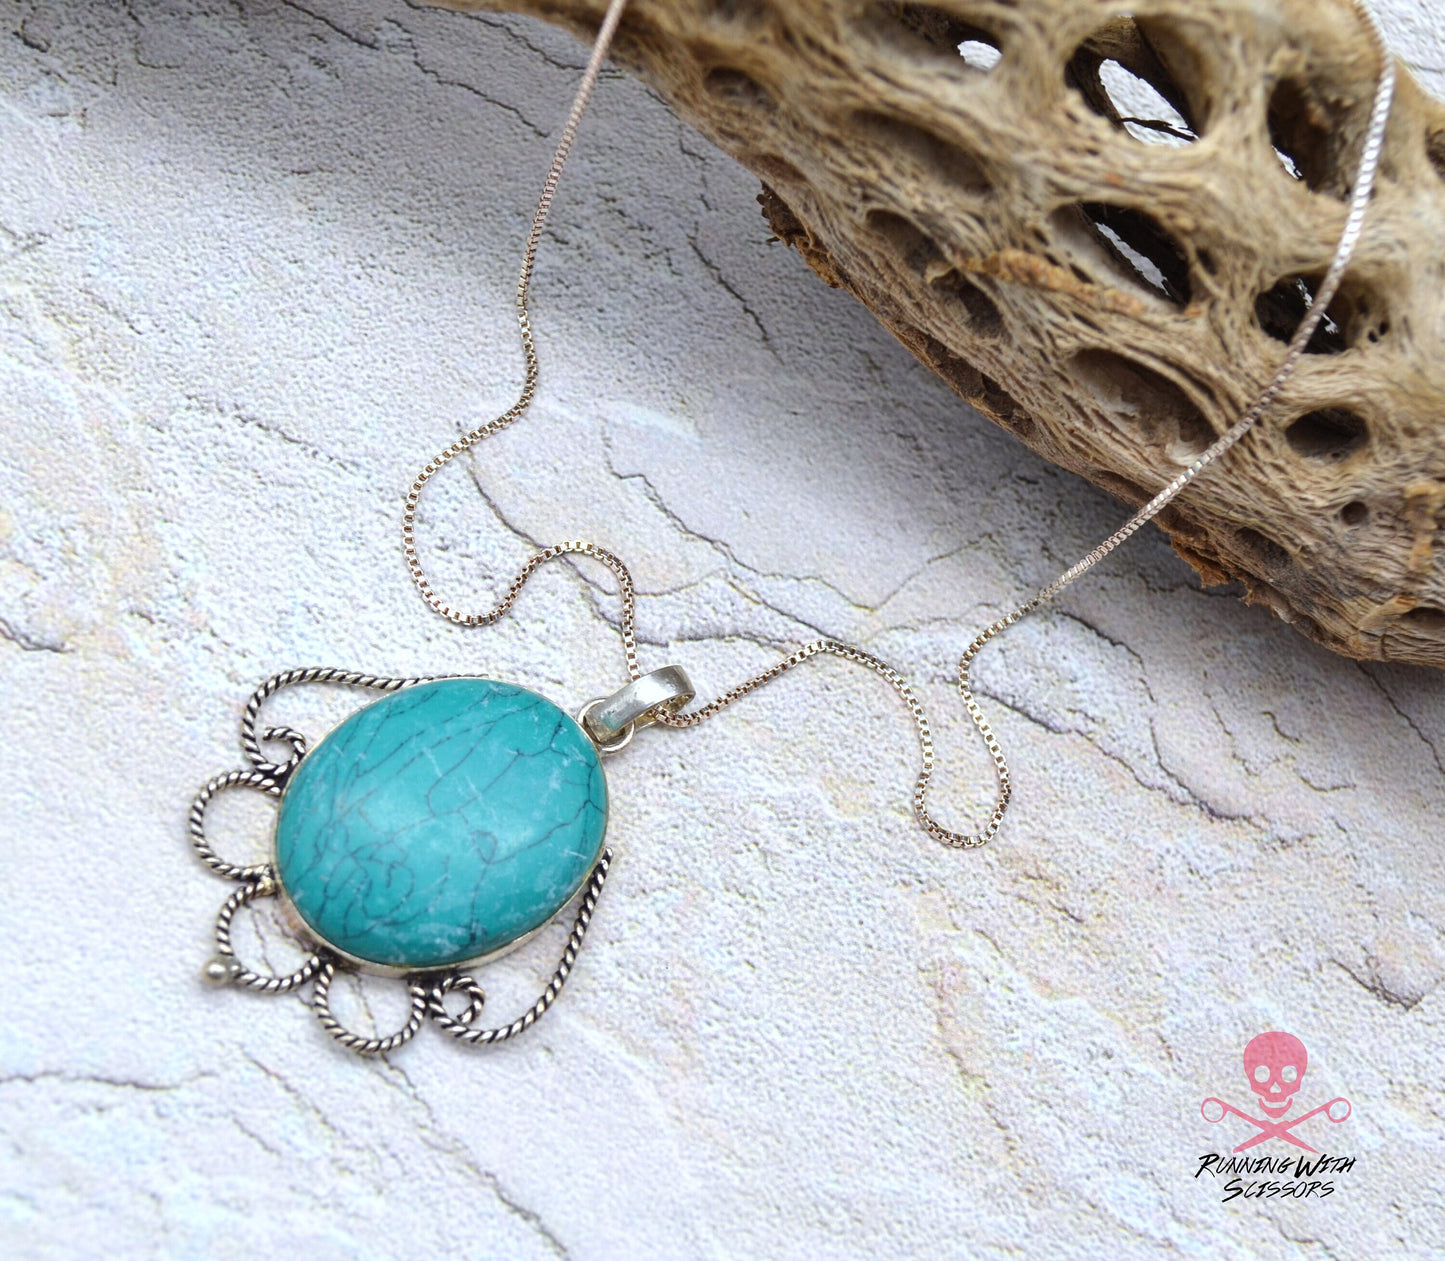 SALE Dazzling Turquoise Necklace 925 Sterling Silver